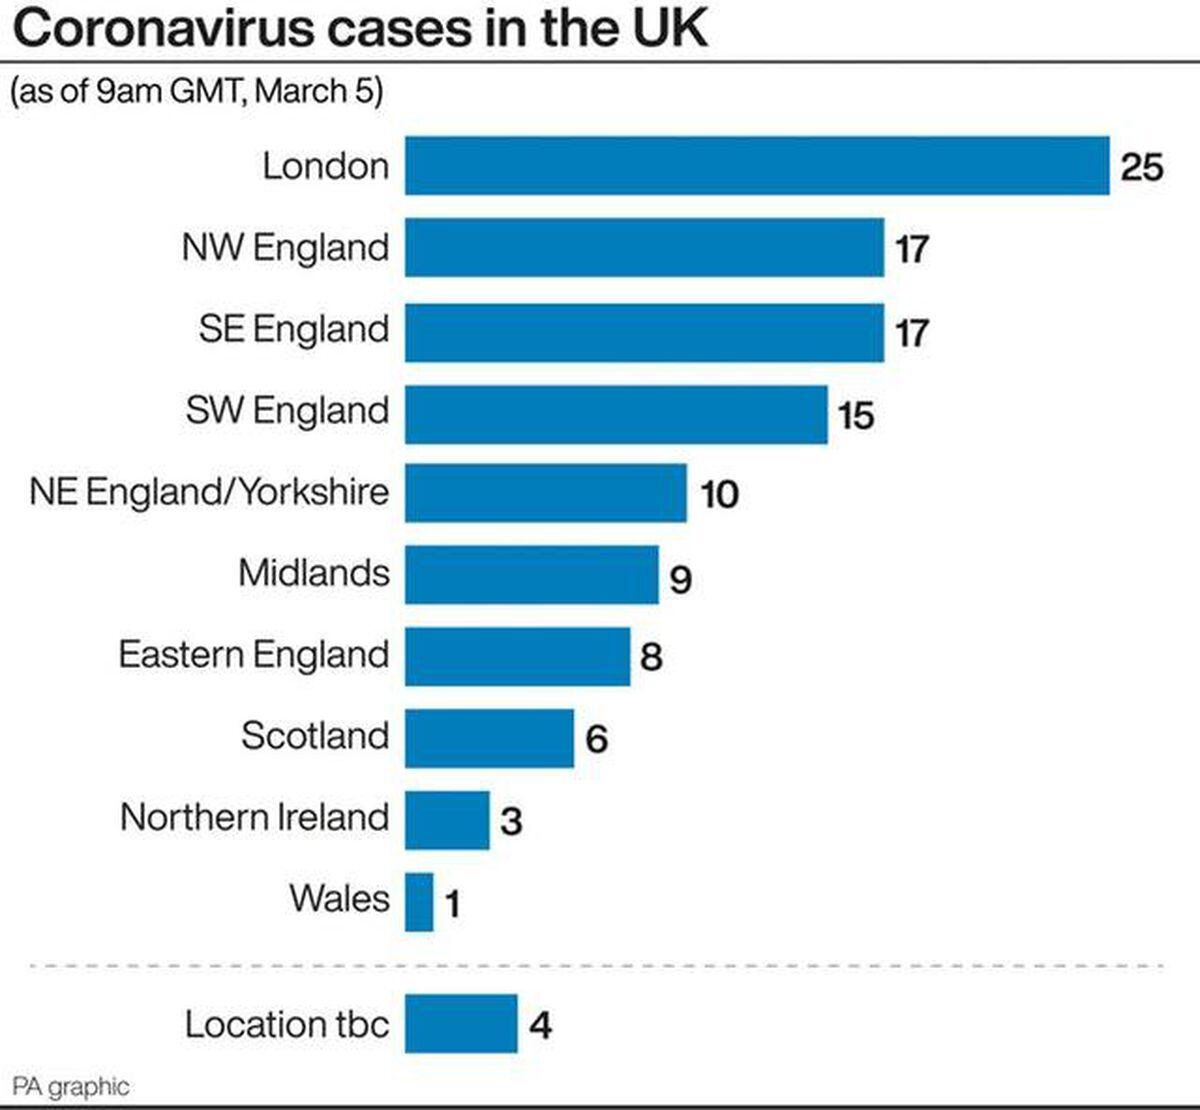 The number of coronavirus cases in the UK as of last night